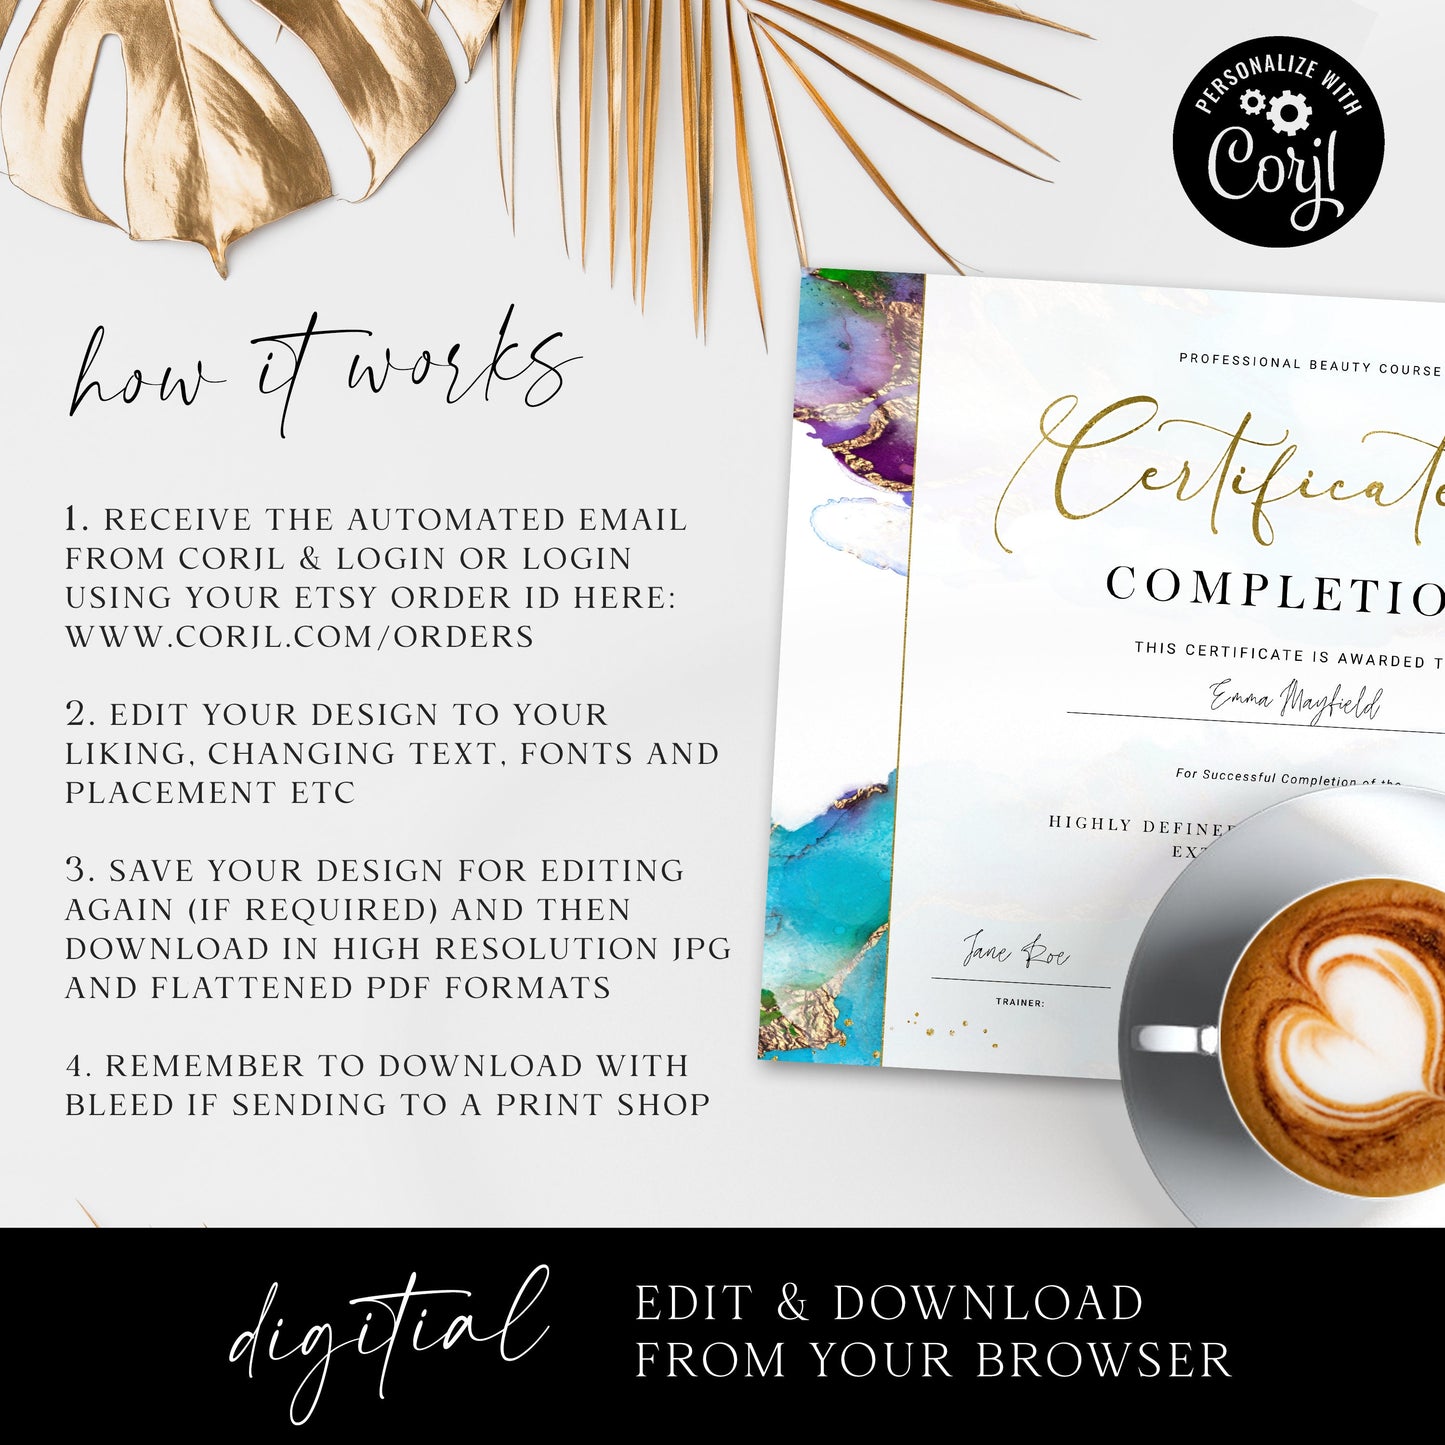 Certificate of Completion Editable Template, DIY Award Certificate, Beauty Business Course Certificate, Printable Certificate Gold DJ-001